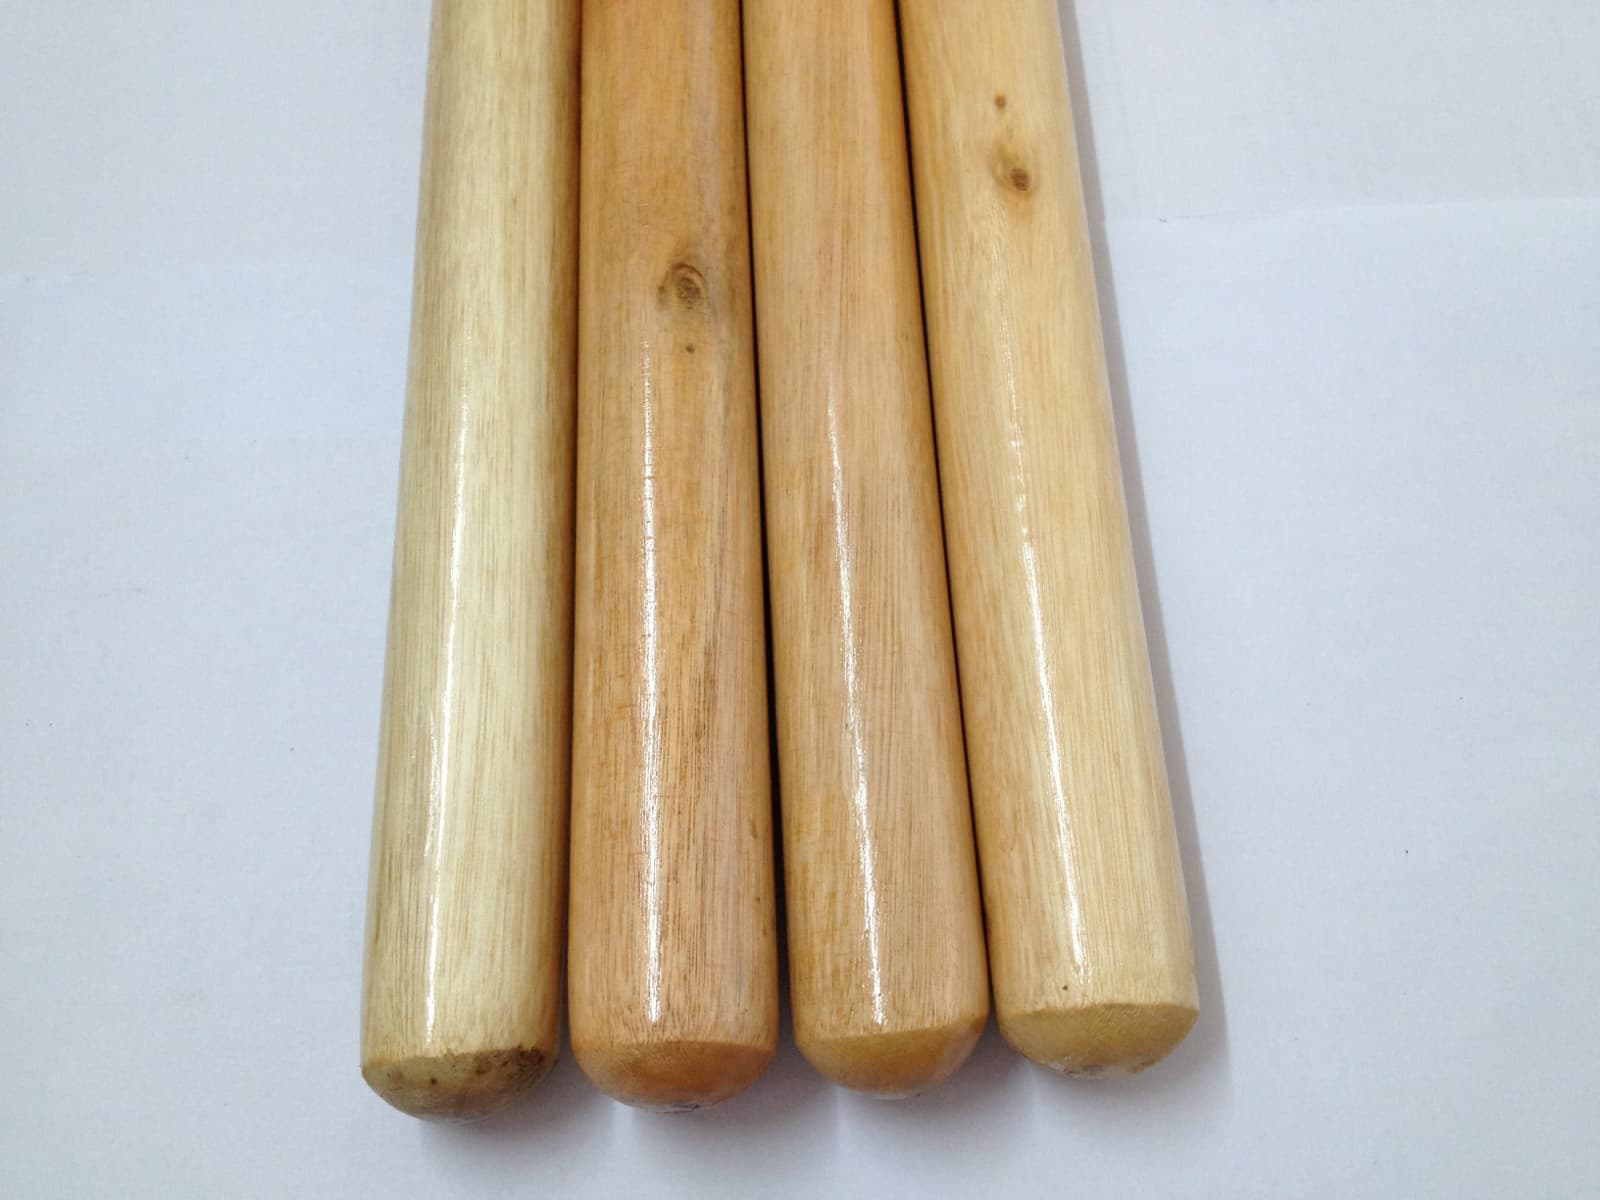 varnished wooden handle,lacquer wooden handle